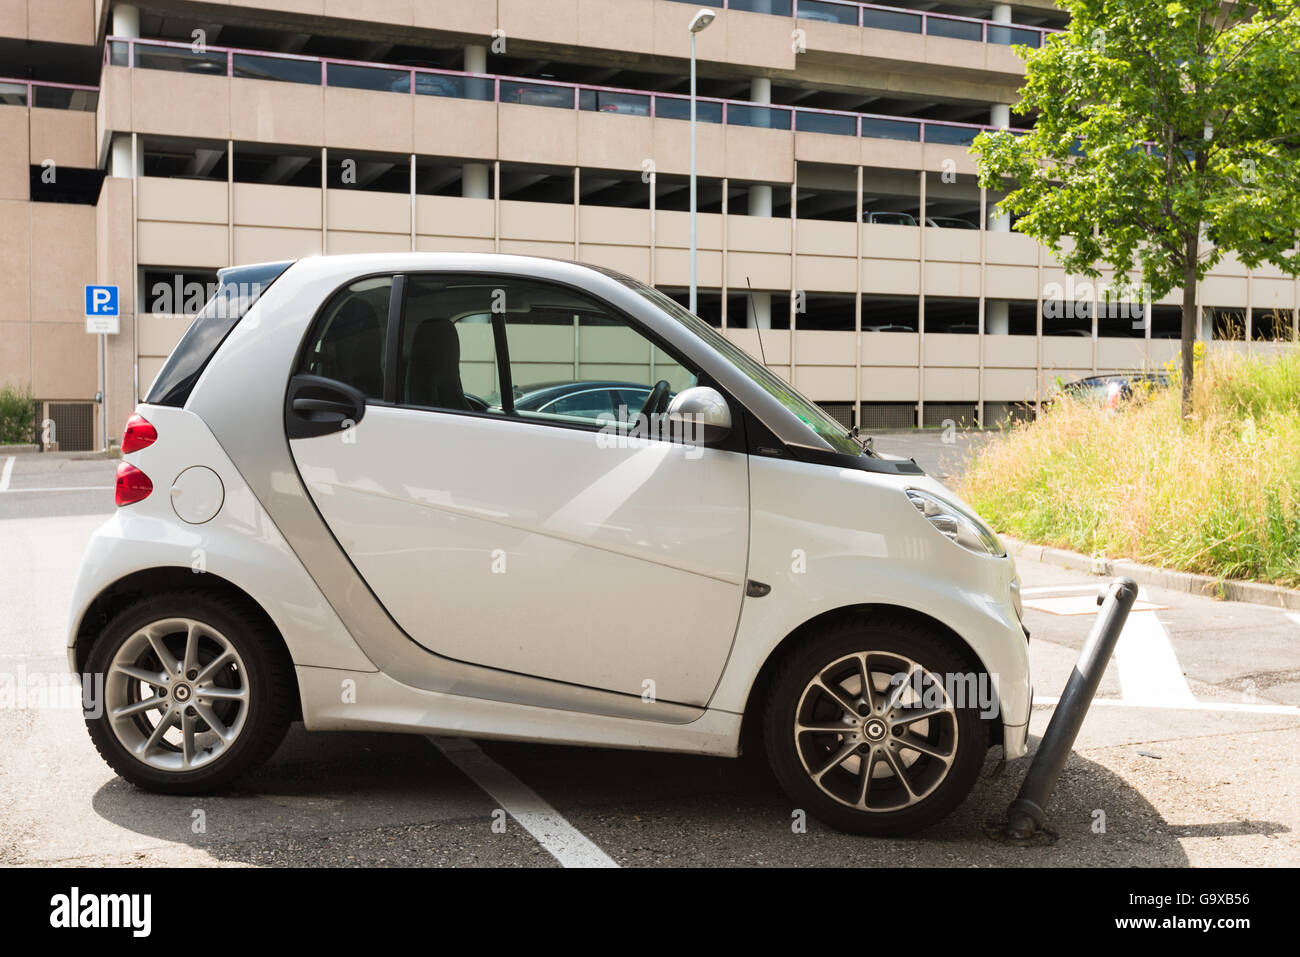 Stuttgart, Germany - June 25, 2016: Very bad parked small Smart car, hitting a metal blocker while parking illegally in a blocke Stock Photo